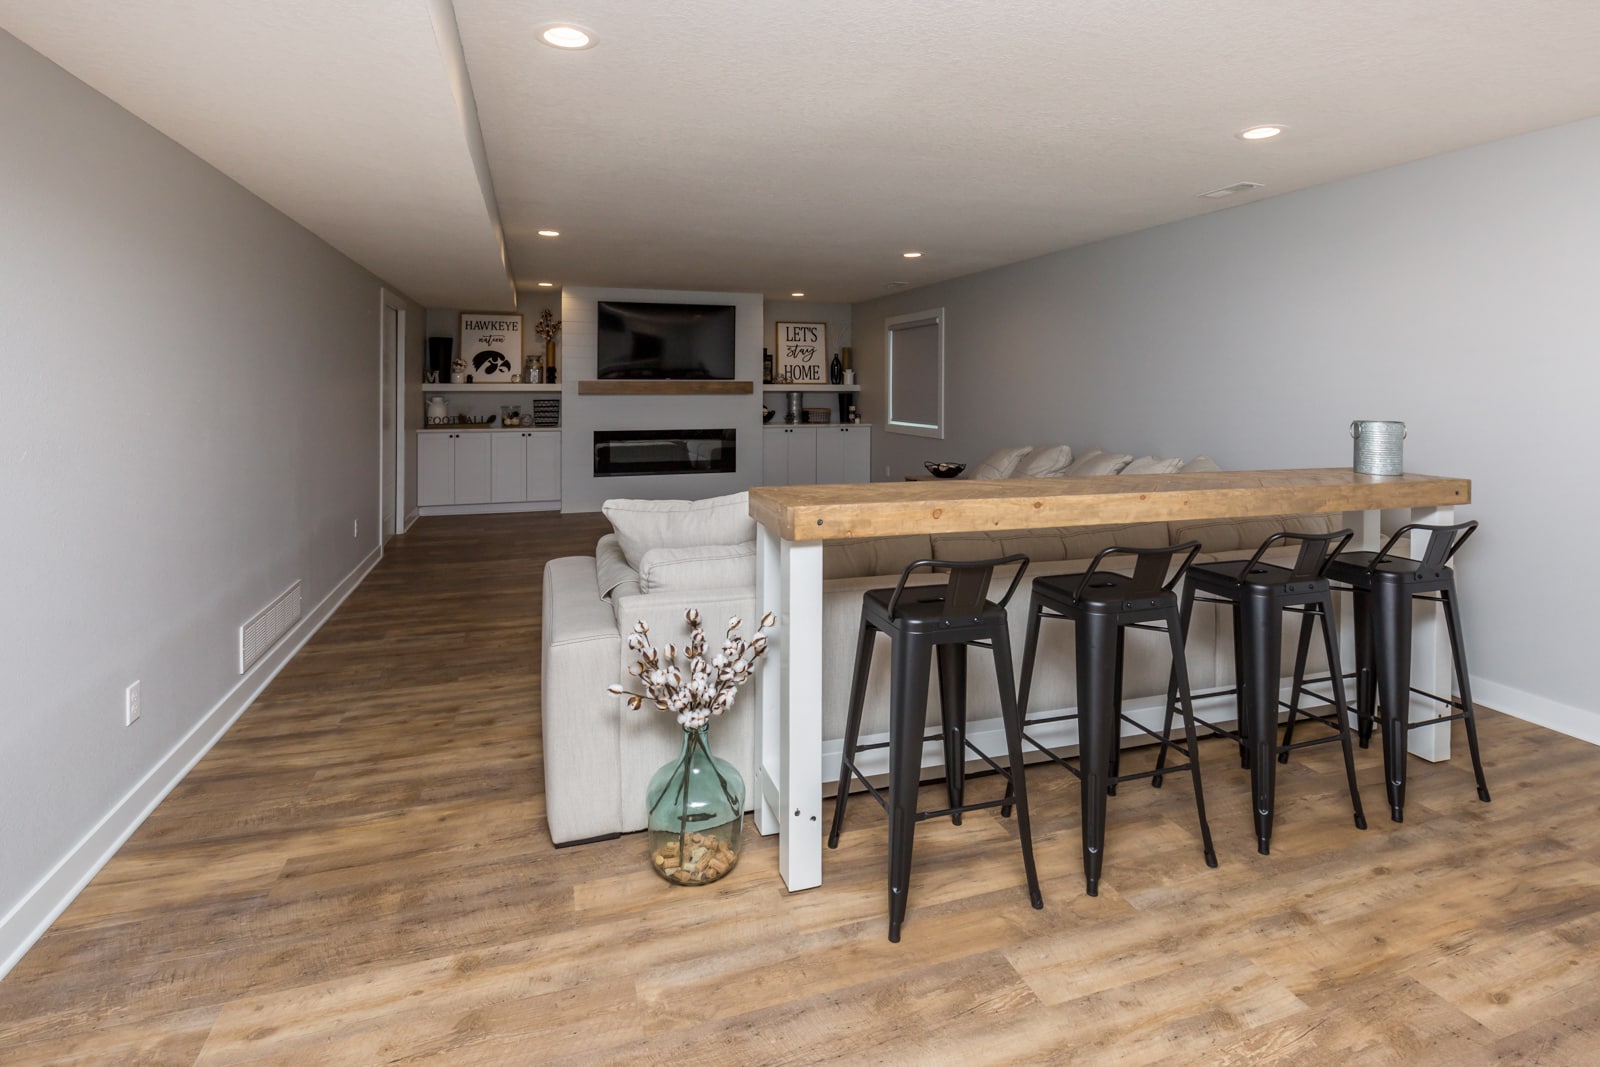 A basement with bar stools and hardwood floors.